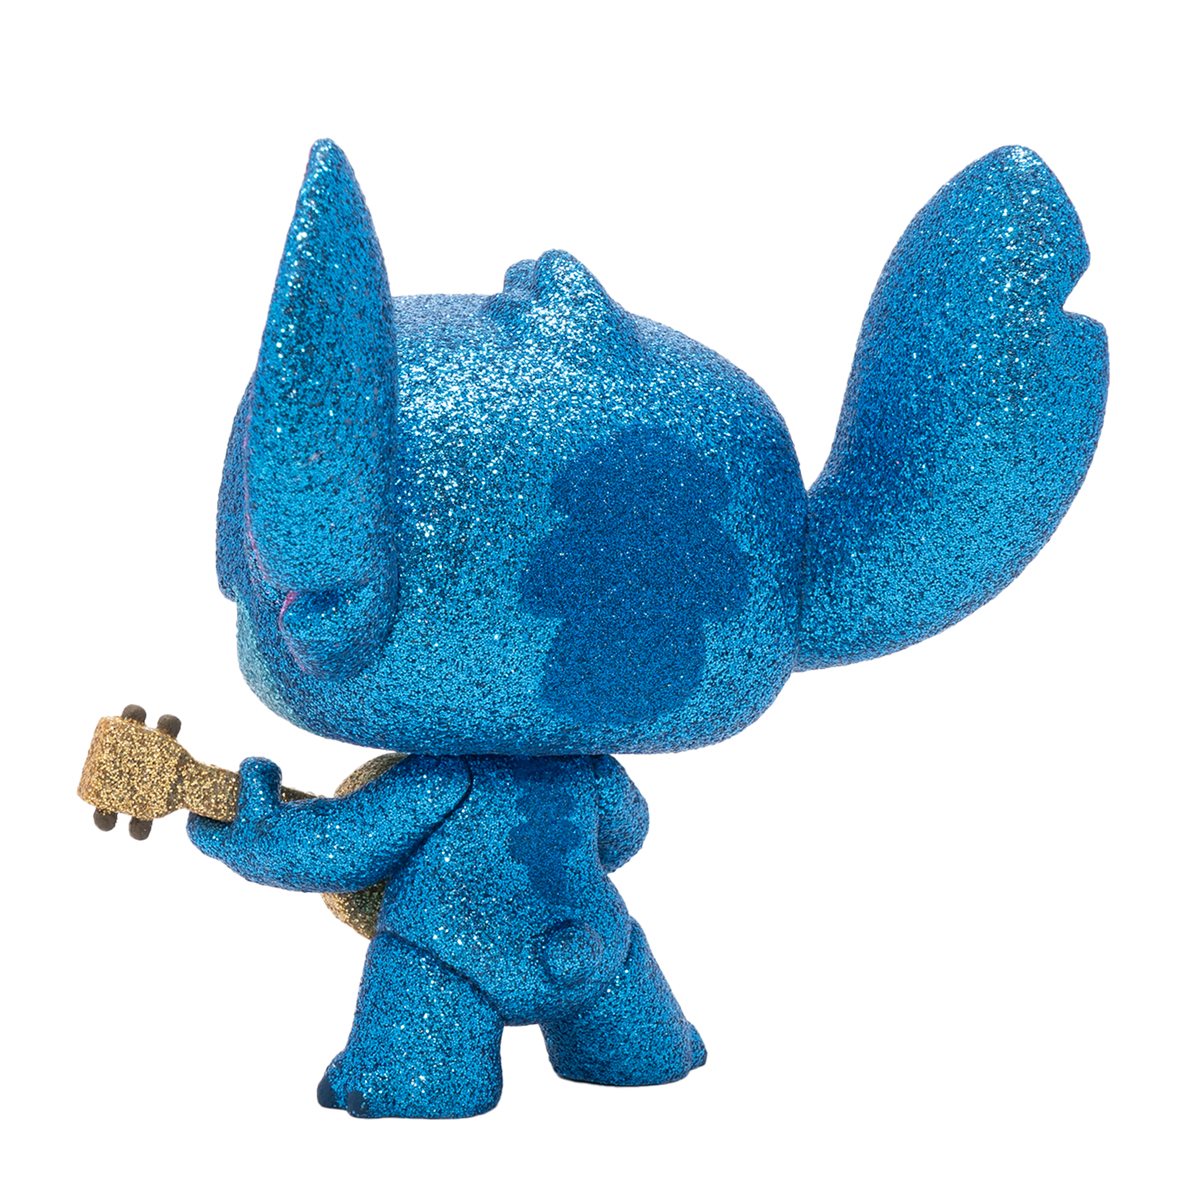 Only Entertainment Earth Has This Exclusive Glittery Stitch Funko Pop!